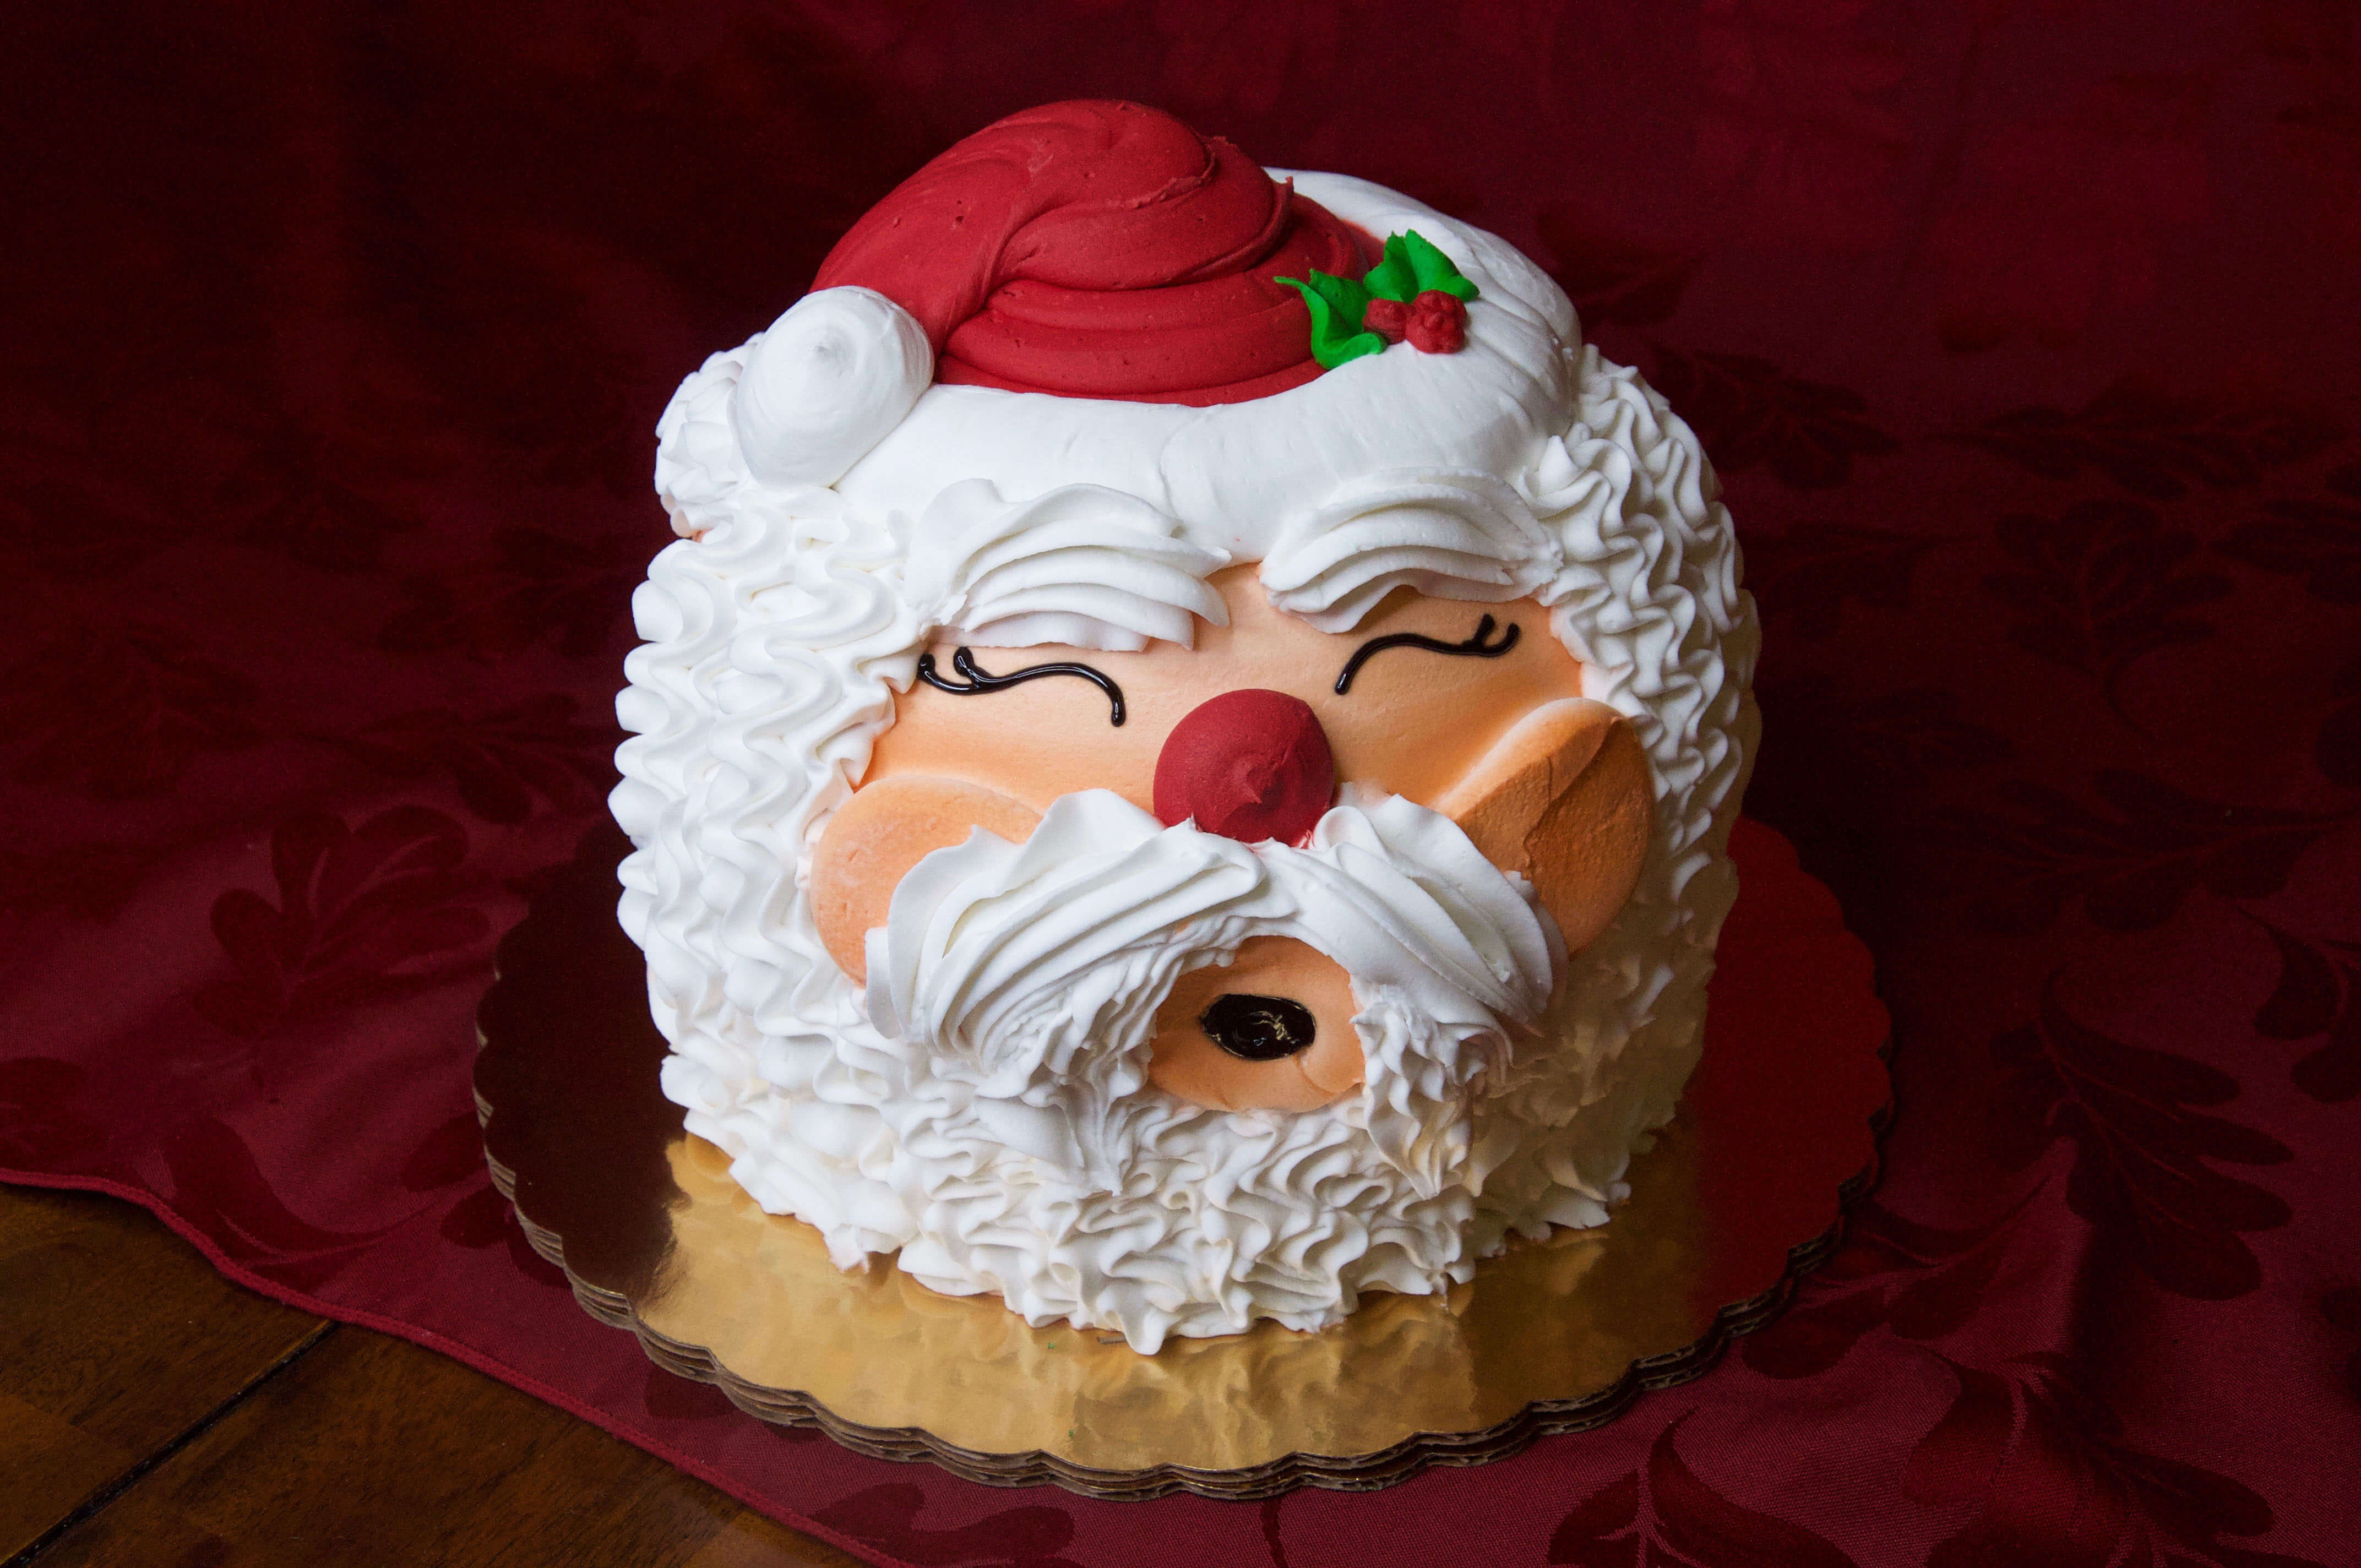 Santa Claus Cake | Christmas Cakes Delivery in KL & PJ